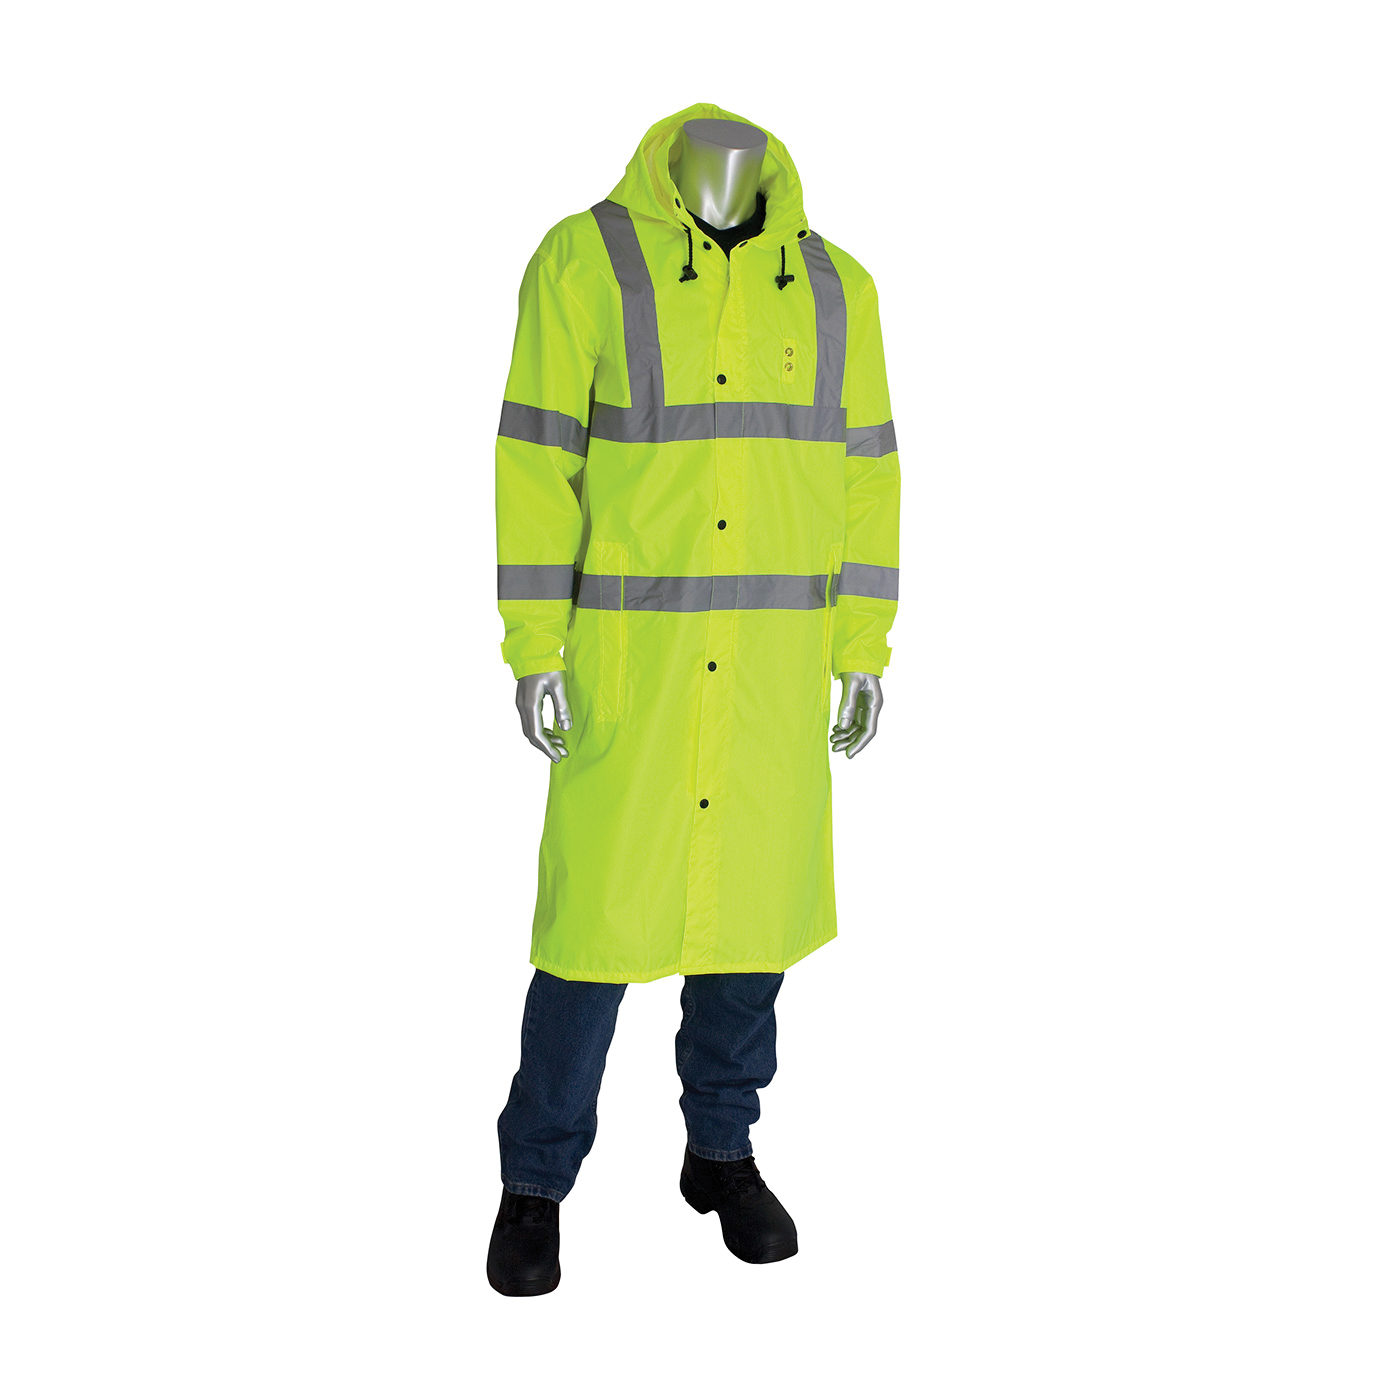 PIP® FALCON™ Viz™ 353-1048-LY/2X All Purpose Waterproof Rain Coat, 2XL, Hi-Viz Lime Yellow, 150D Polyester Coated with Polyurethane, Resists: Water, ANSI 107 Type R Class 3, Concealed Hood